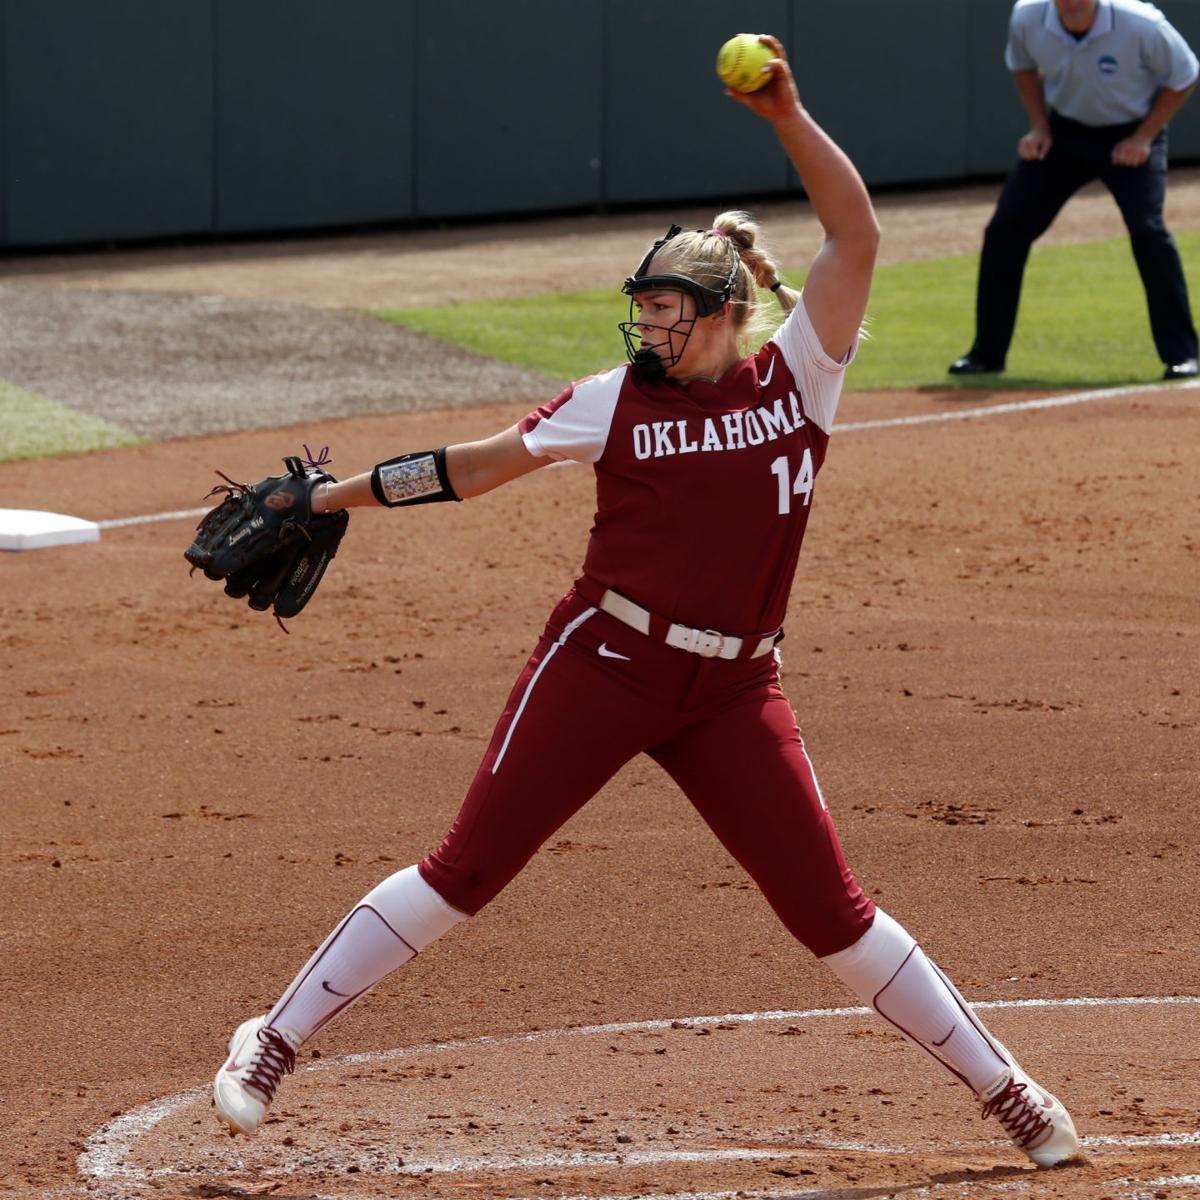 Oklahoma softball: Paige Lowary drafted first overall in 